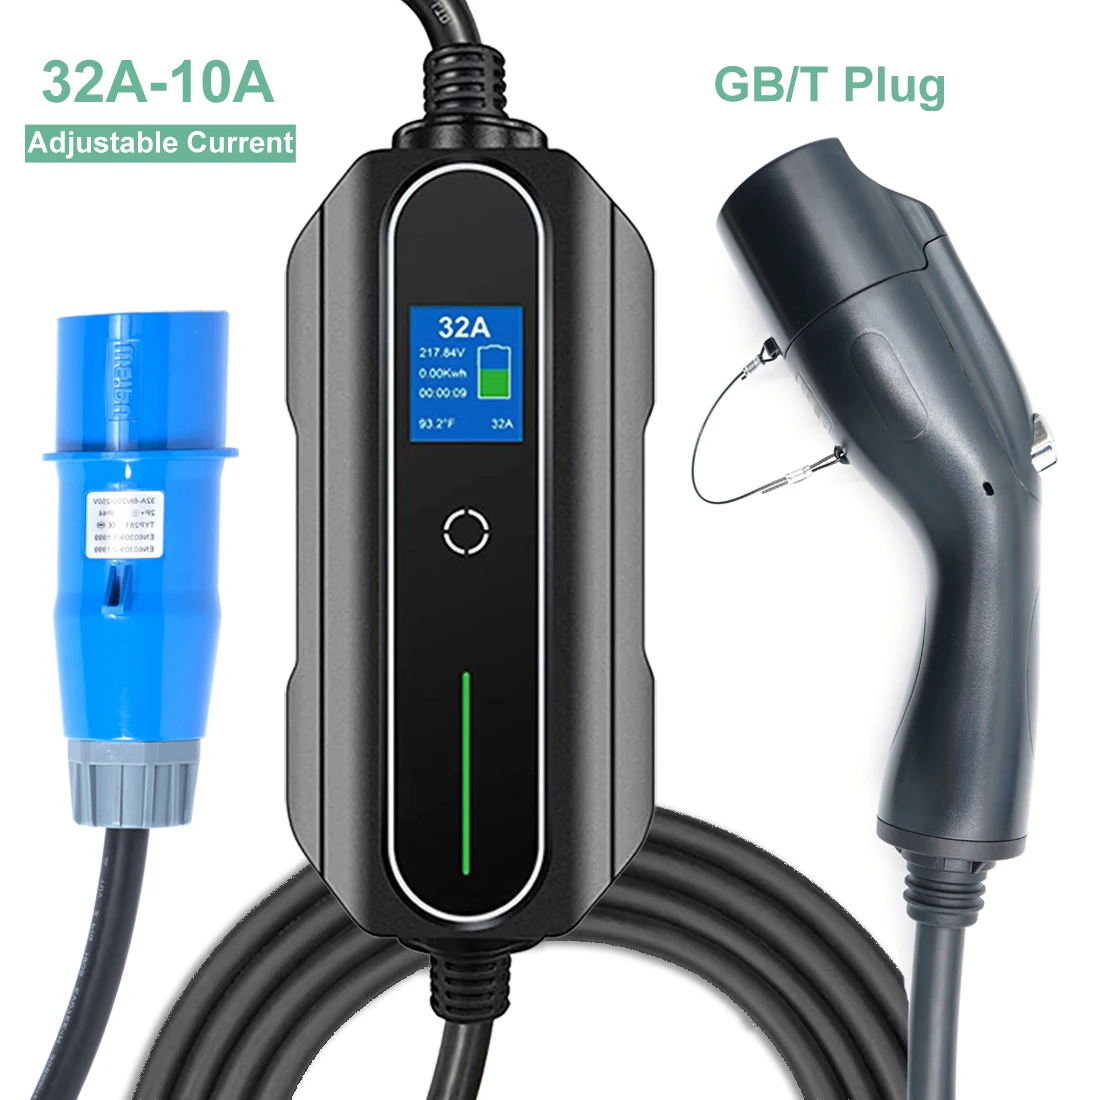 Home Portable EV Charger GBT 32A 7.2KW Single Phase Adjustable Current Fast Charging Controller Box for GB/T Electric Cars 5M